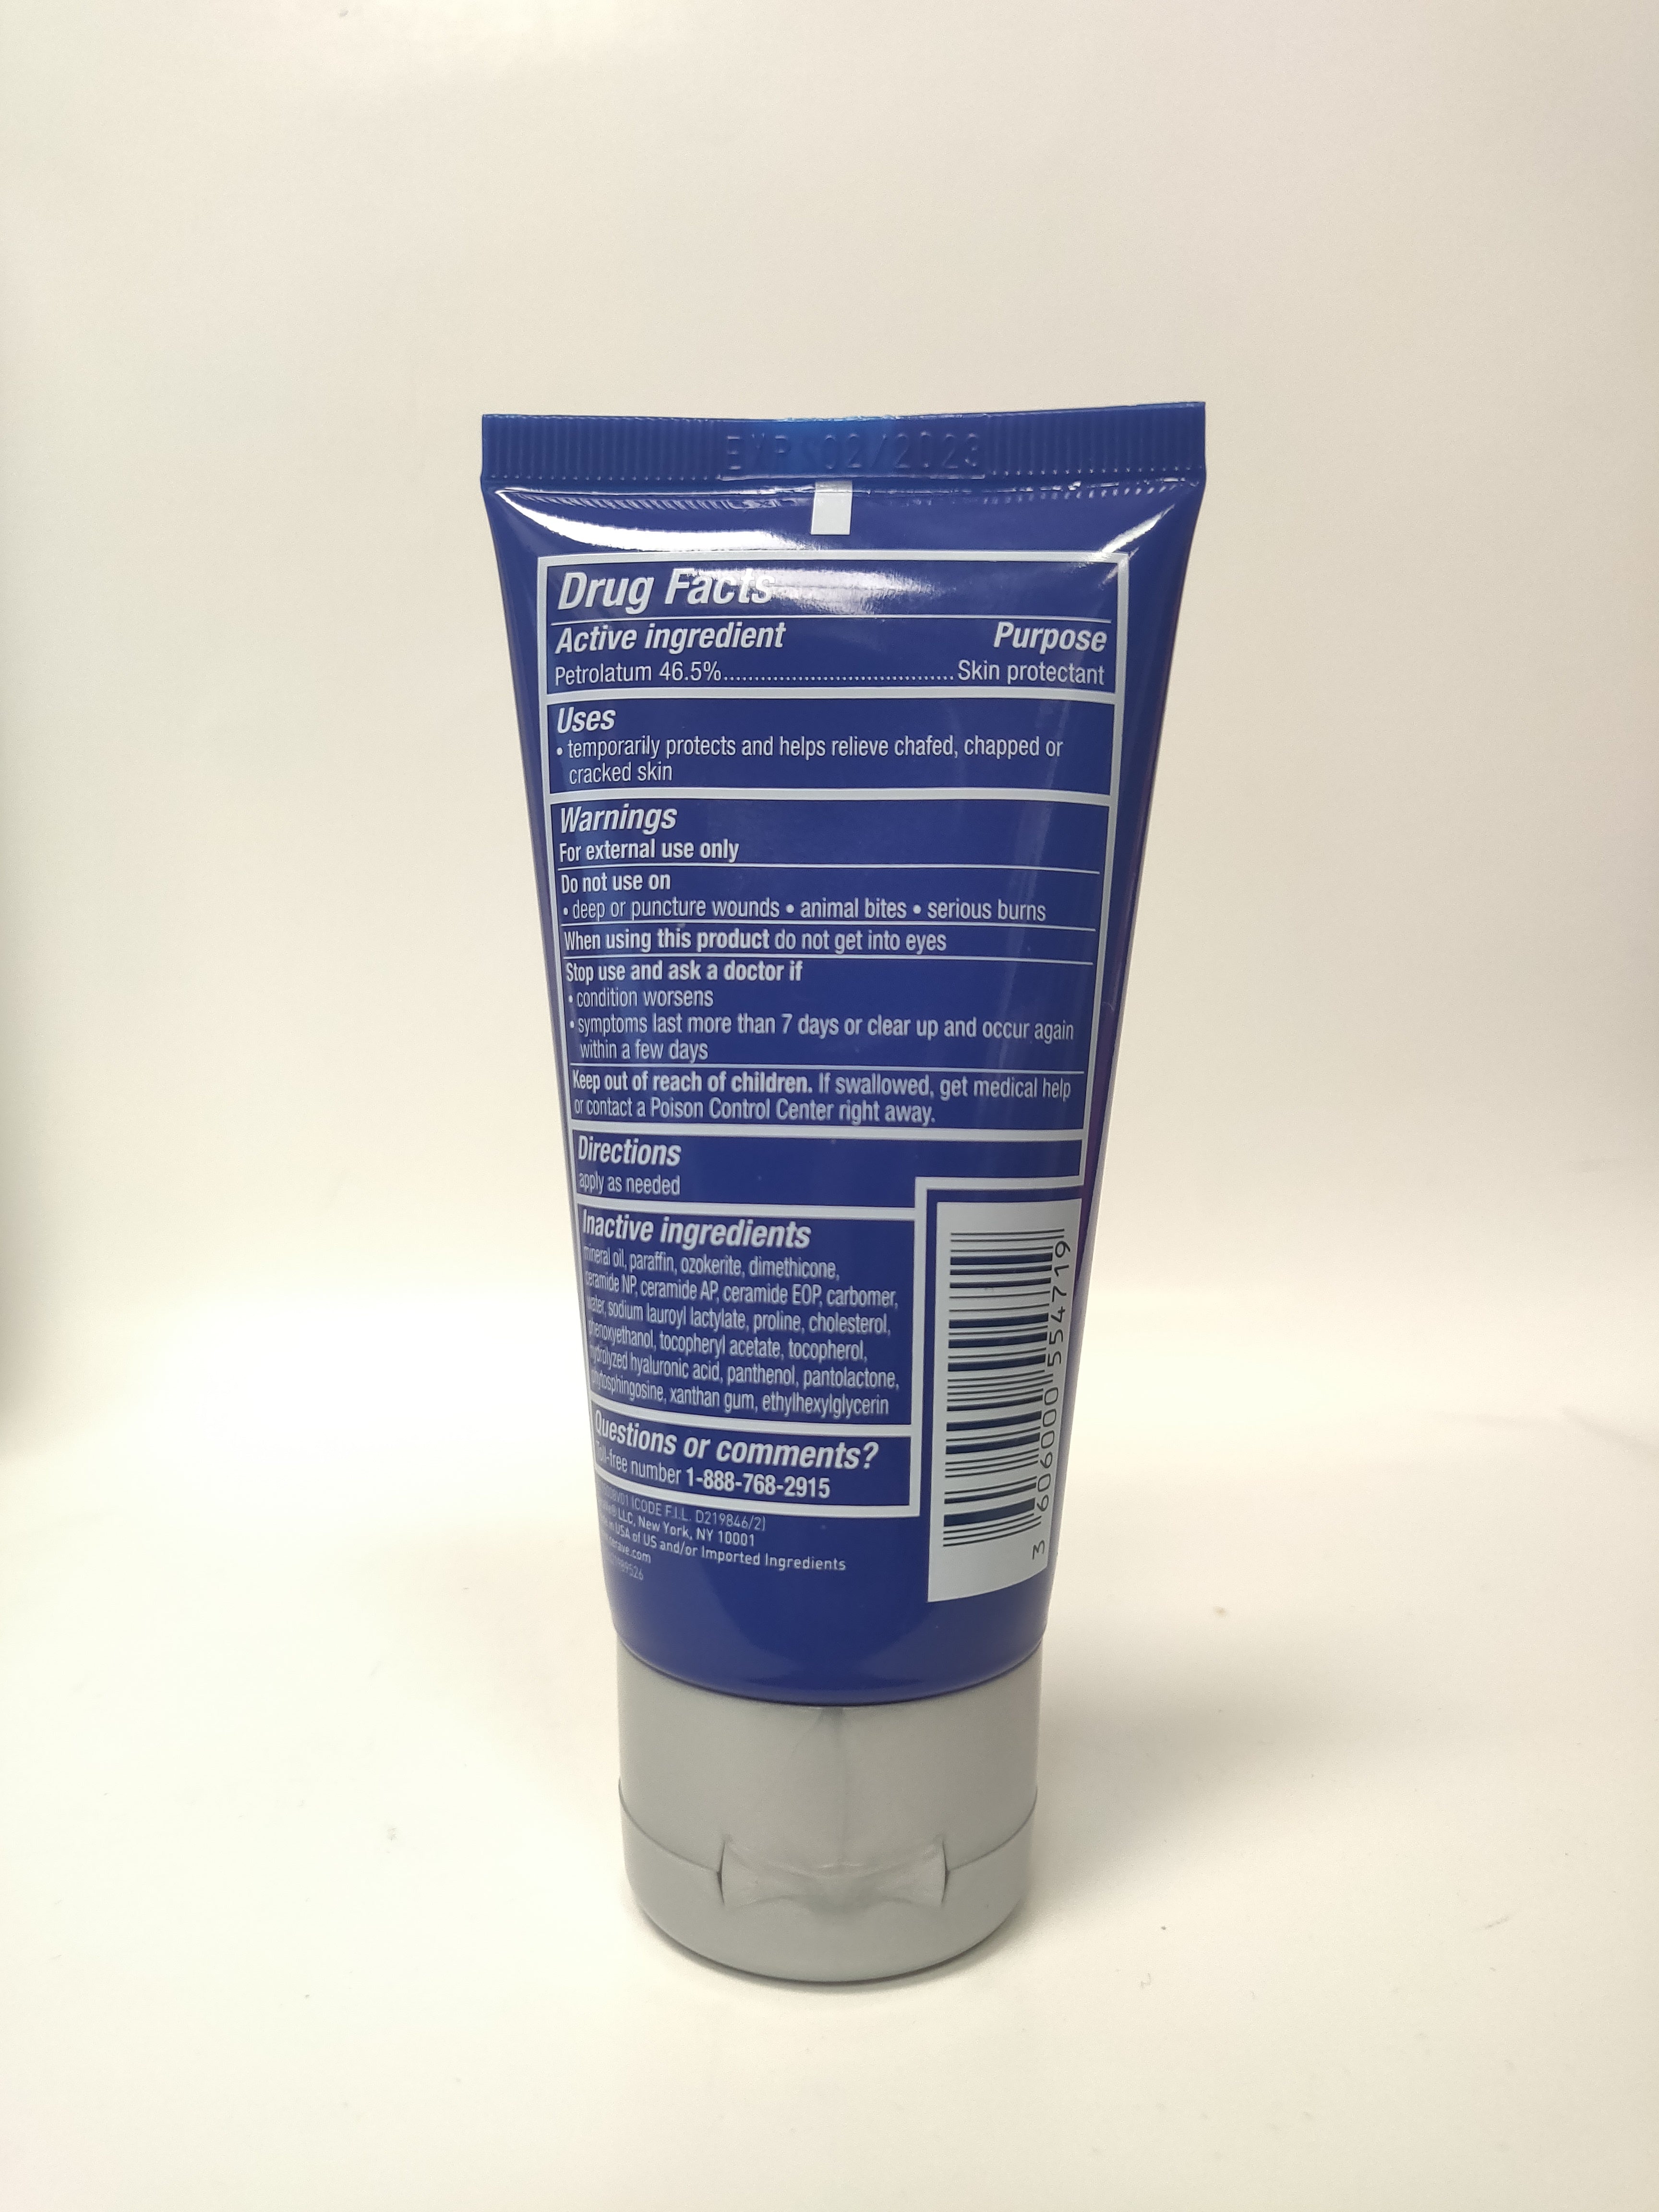 CeraVe Healing Ointment - Skin Protectant Lotion - 1.89 oz